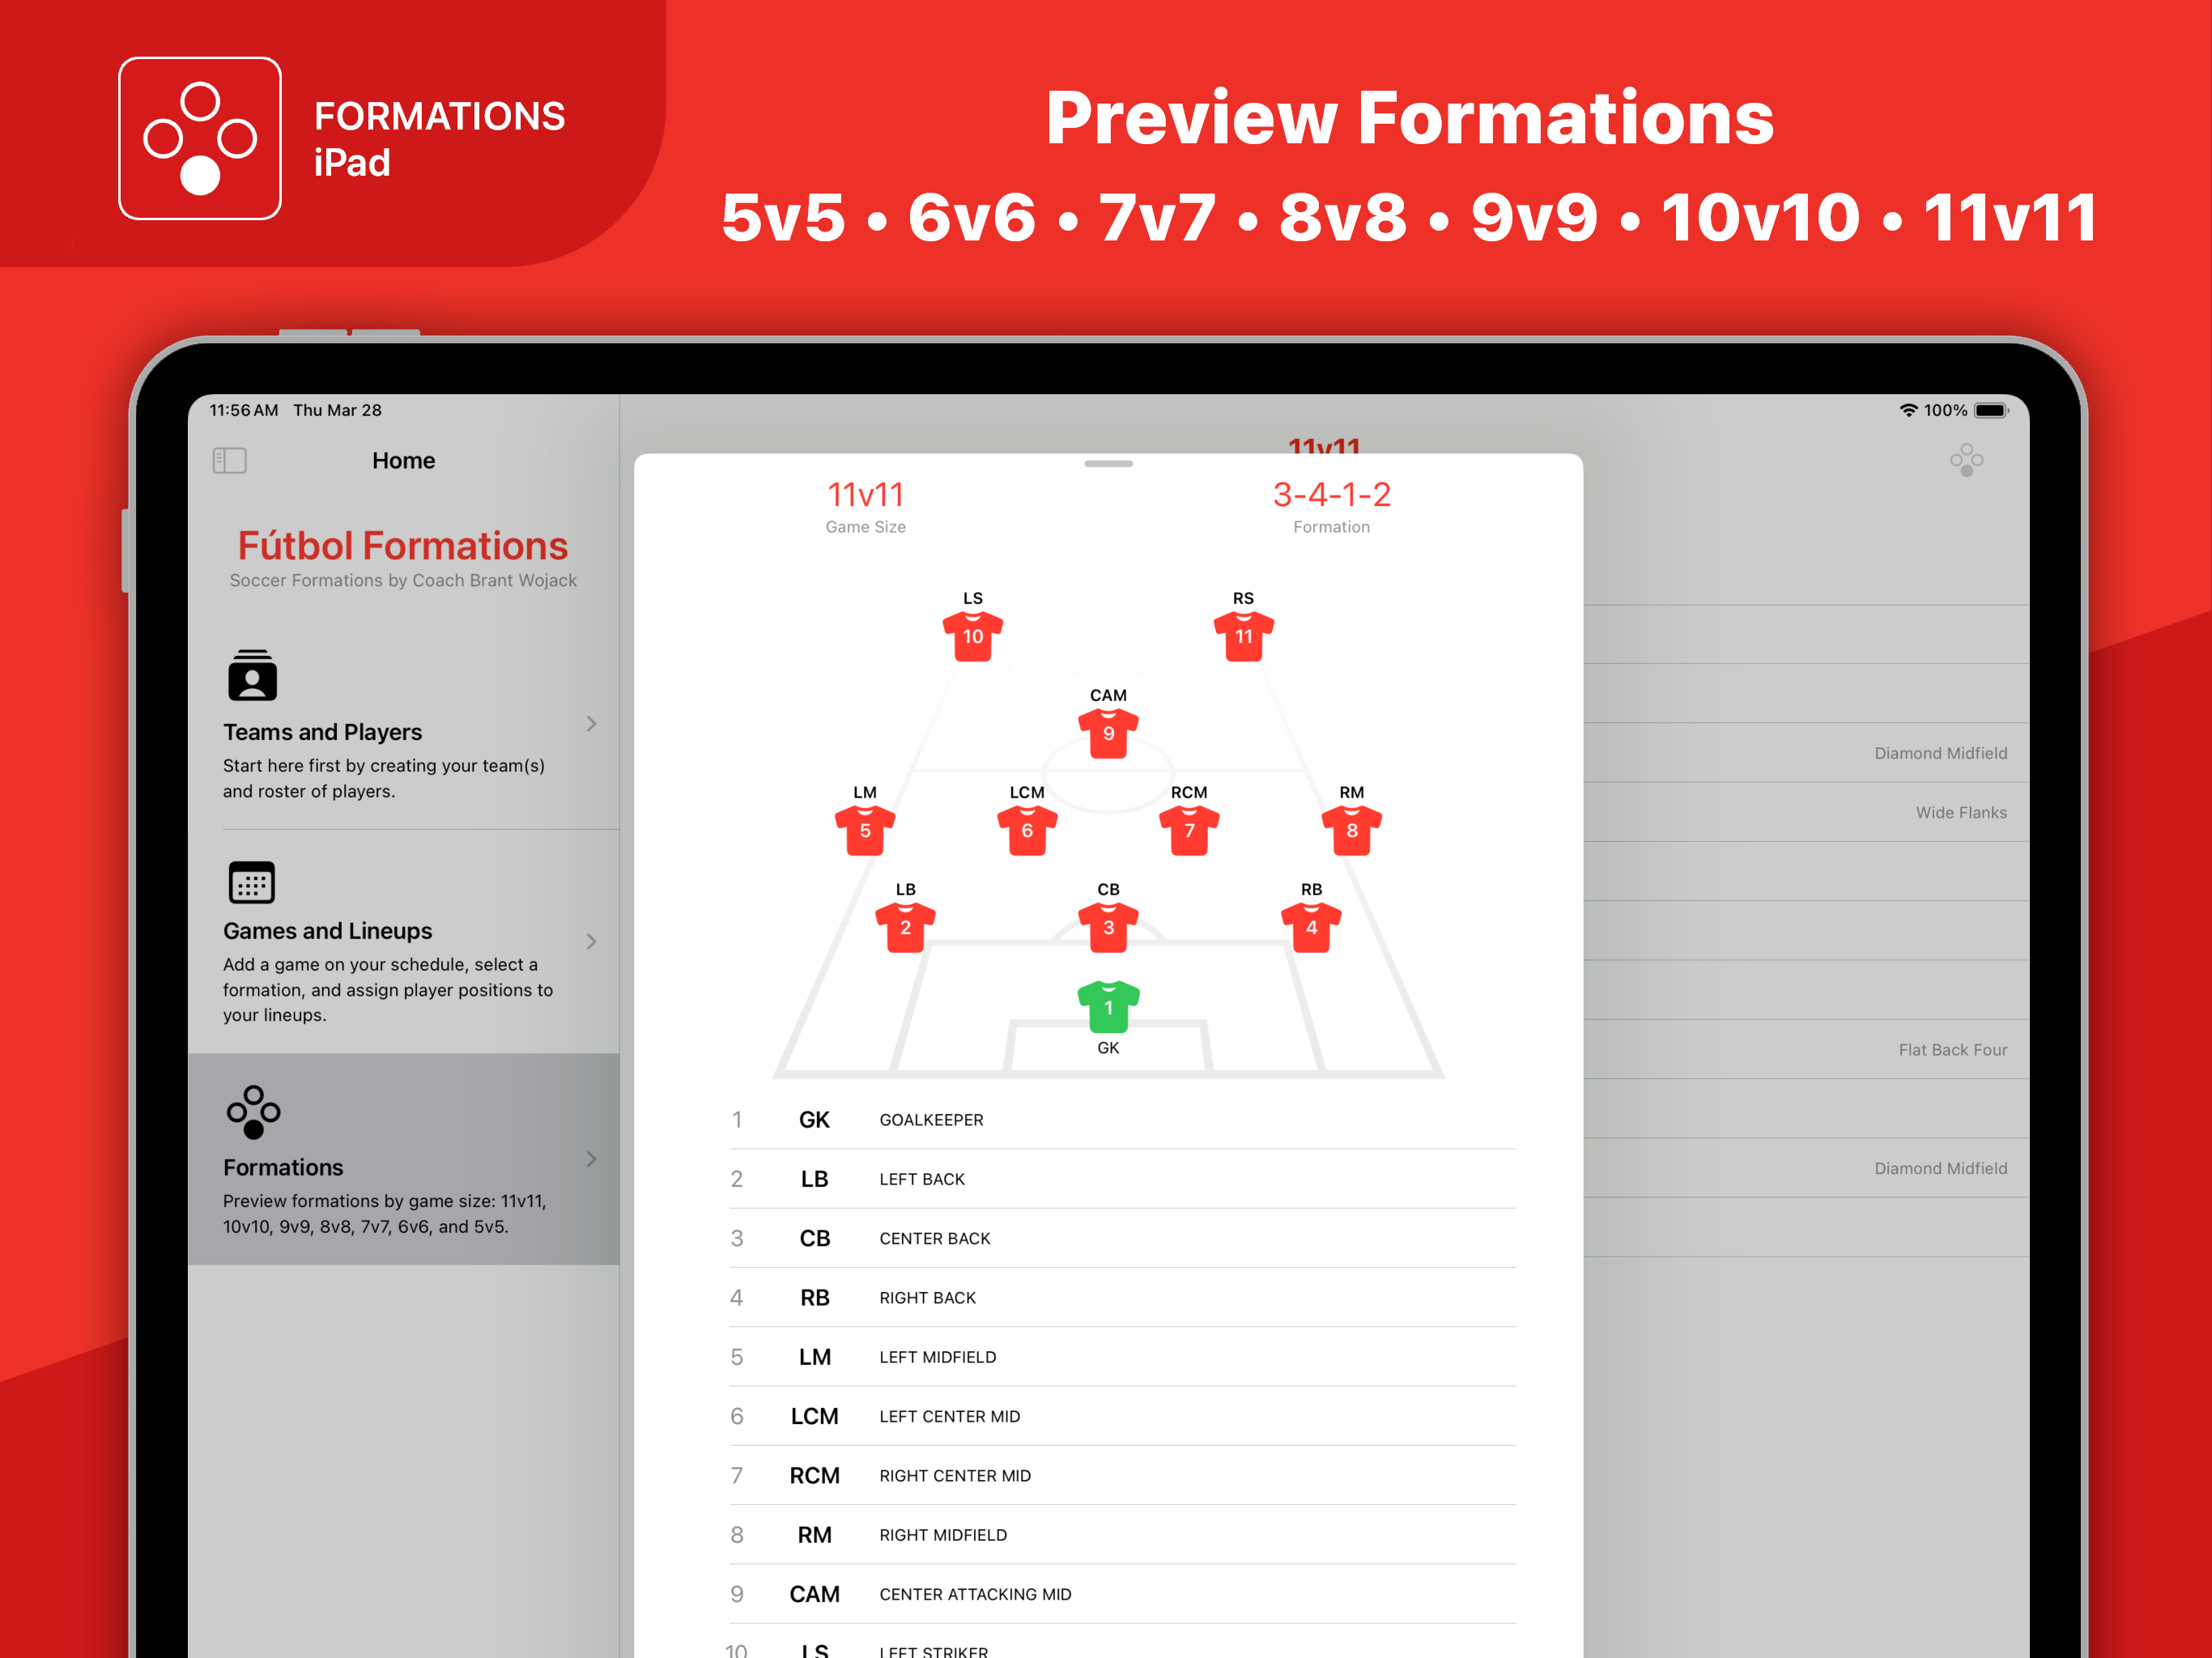 BW Formations for iPad - Preview Formations